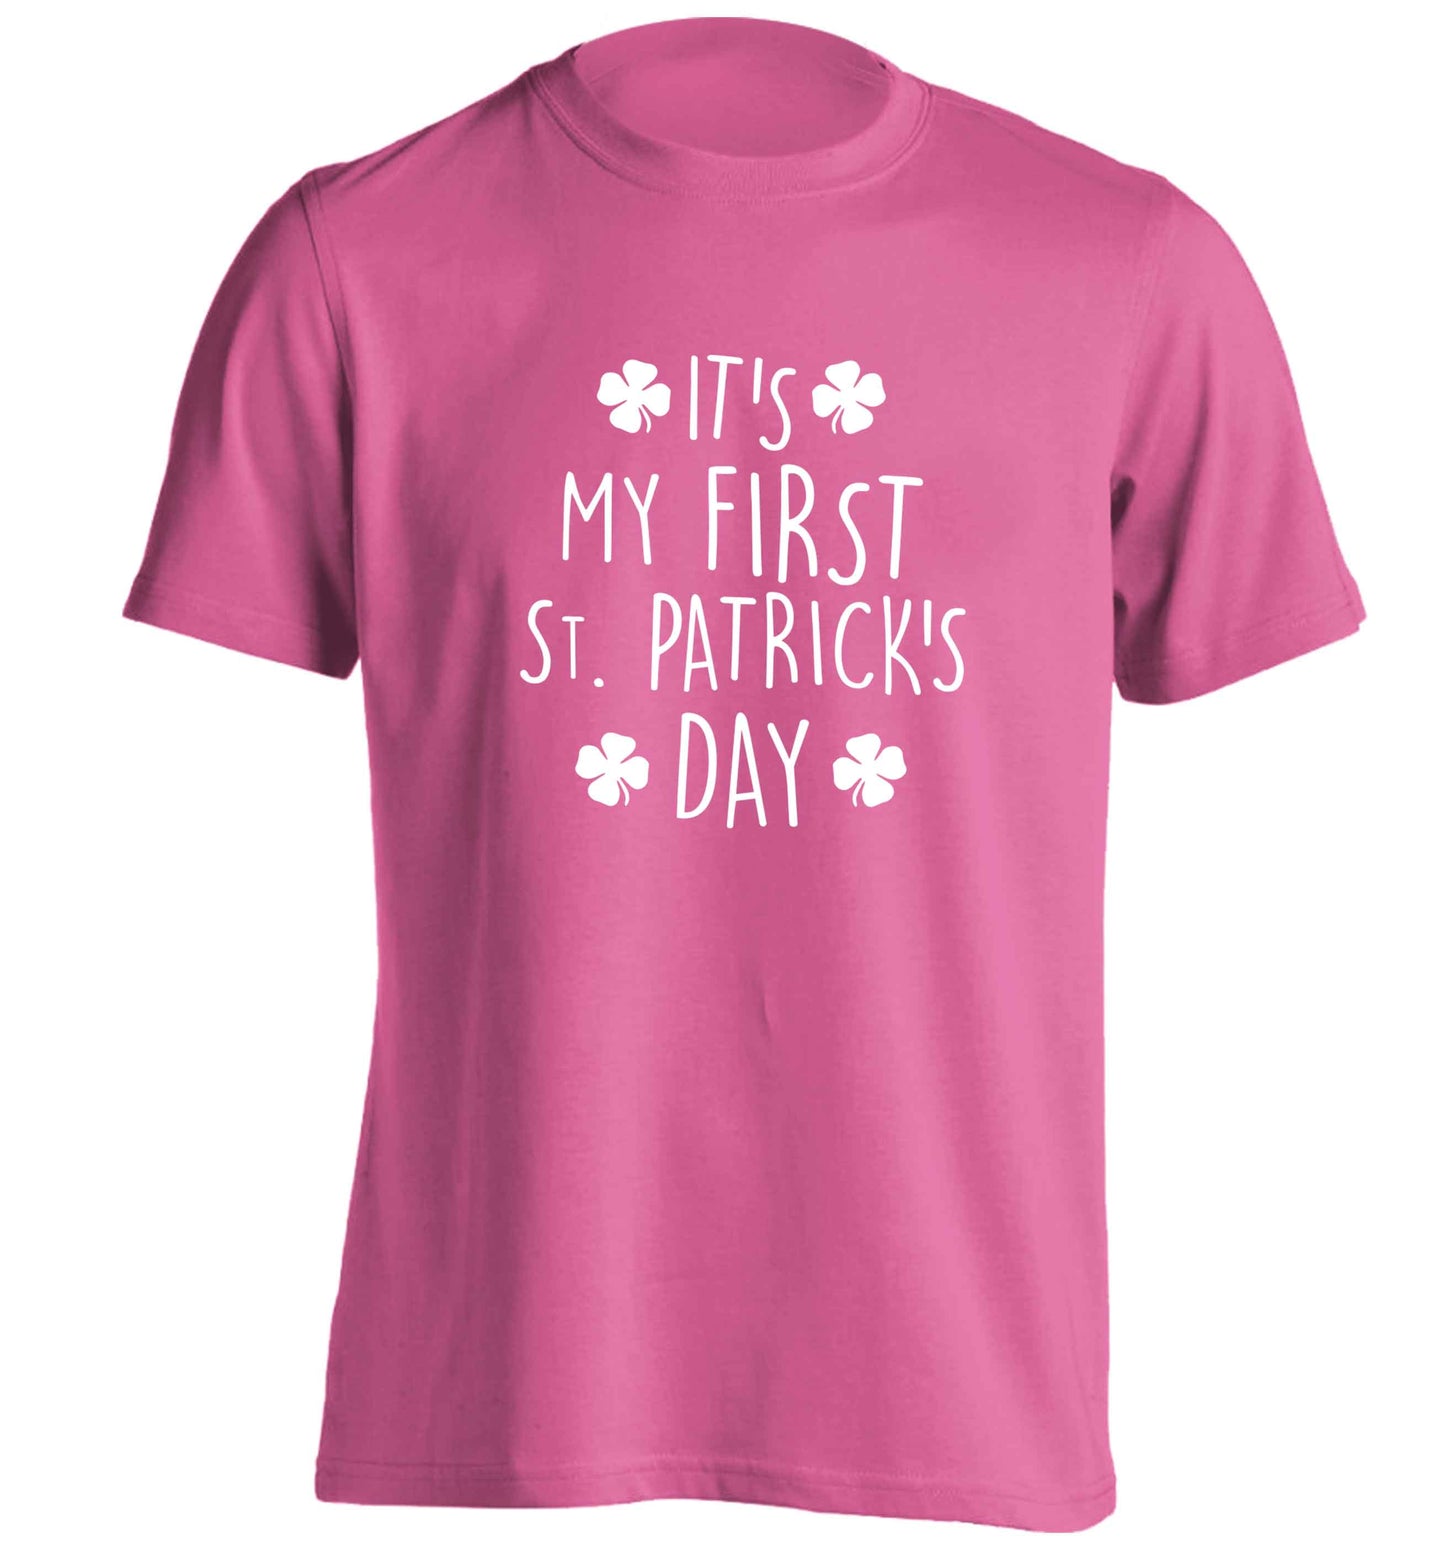 It's my first St.Patrick's day adults unisex pink Tshirt 2XL